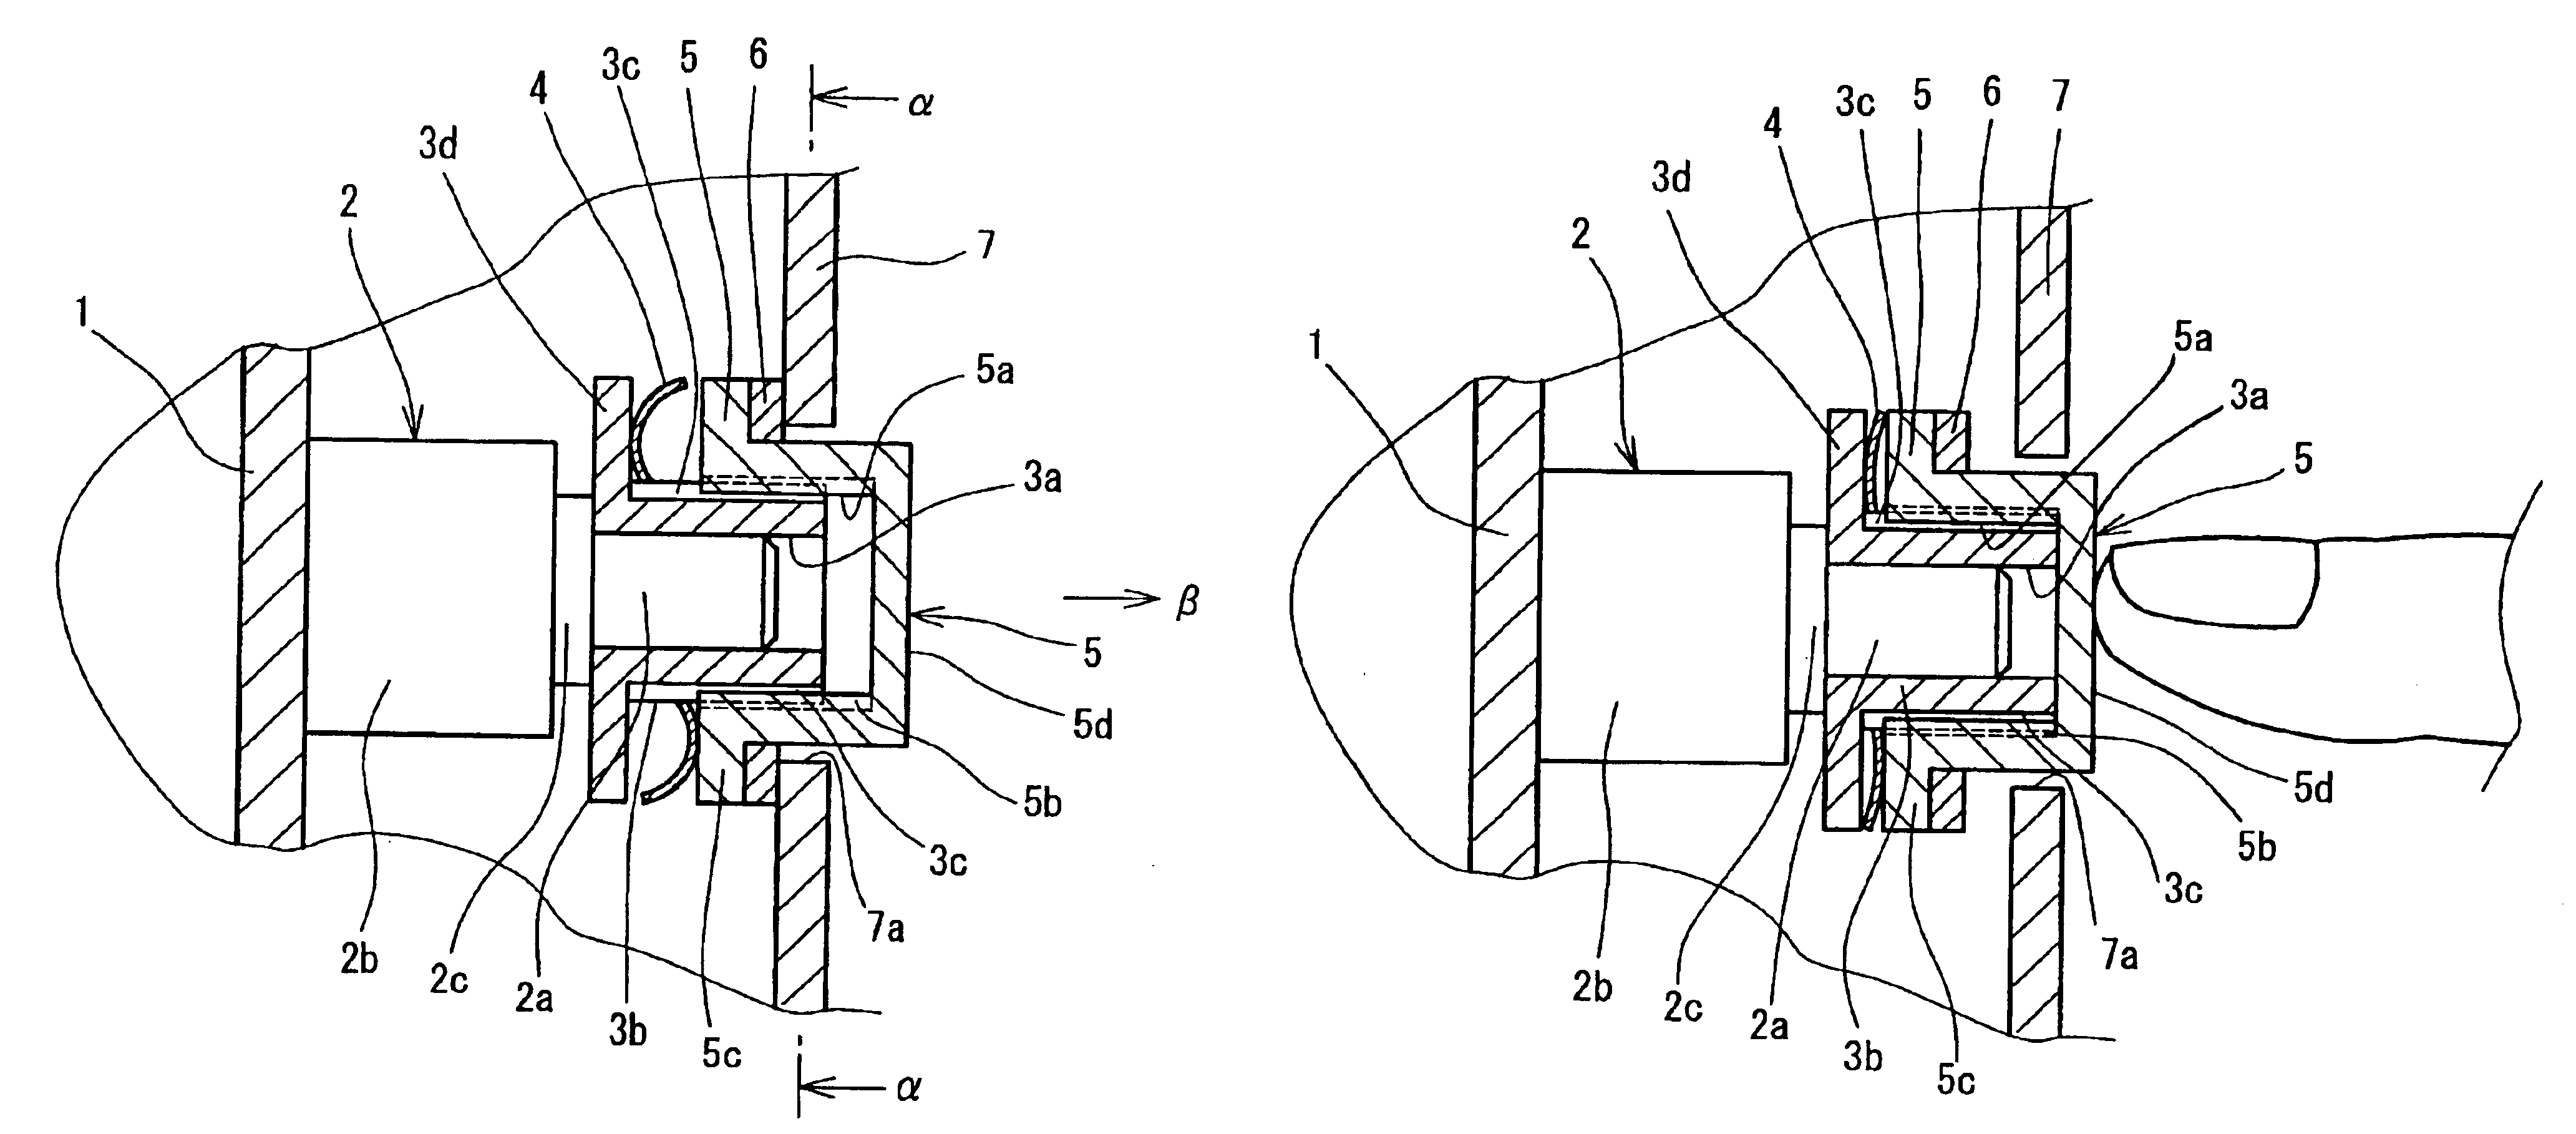 Anti-malfunction mechanism for variable output device